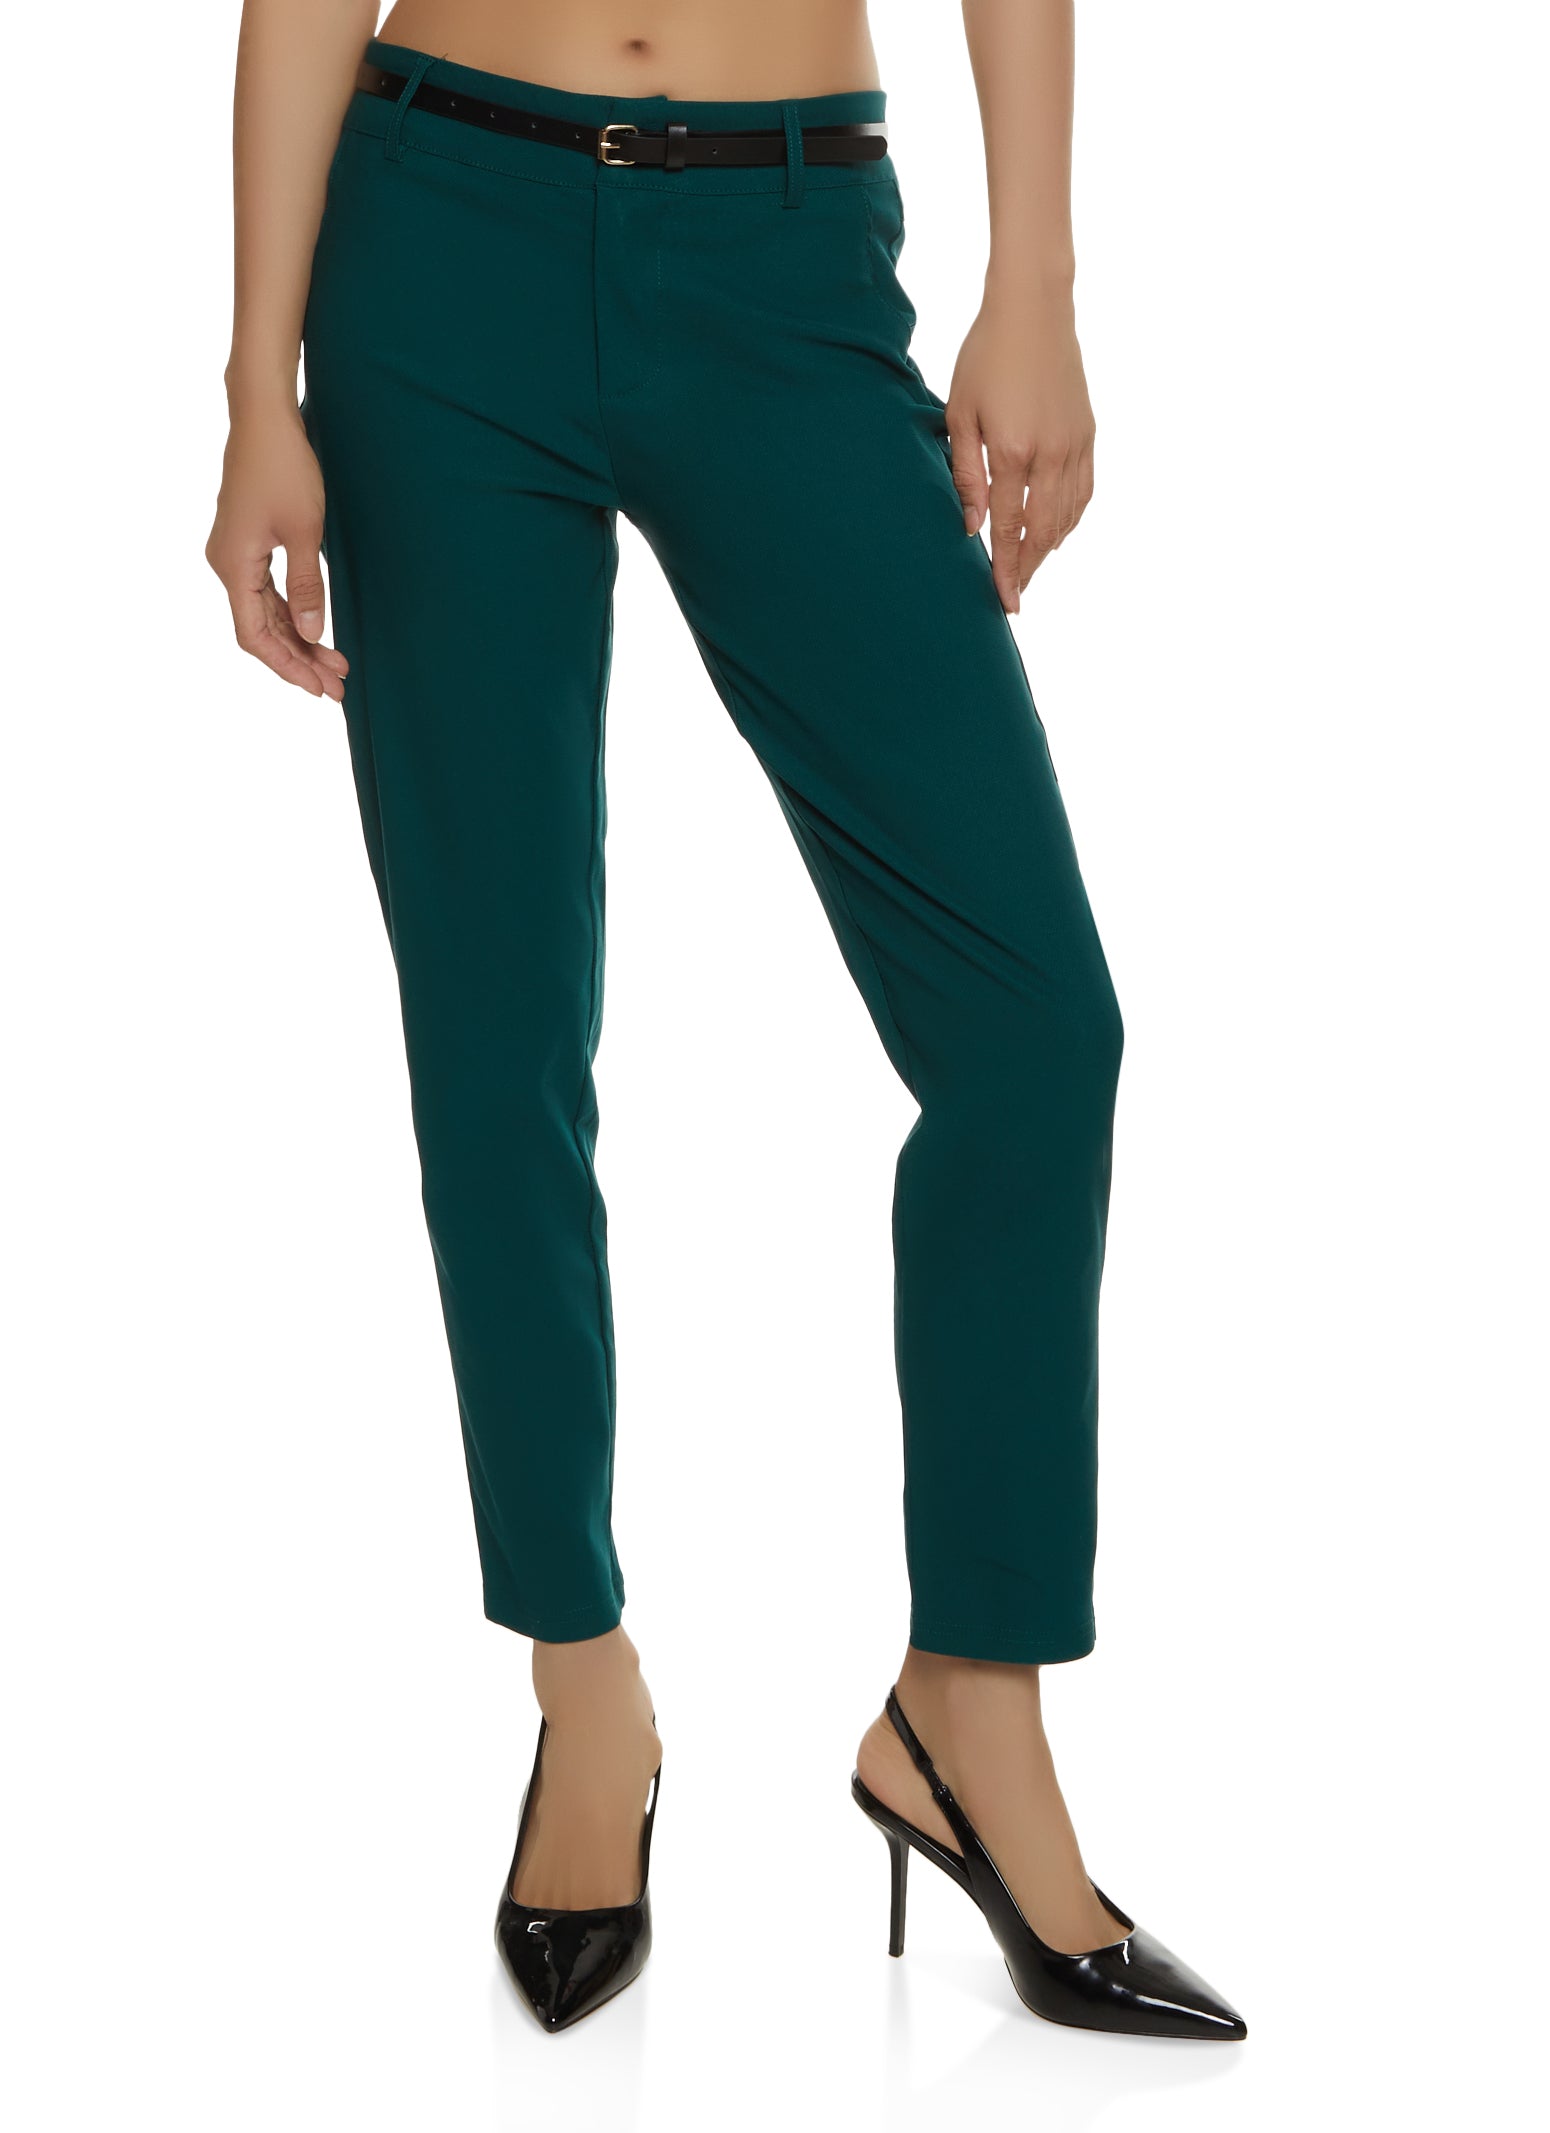 Twill Belted Ankle Dress Pants